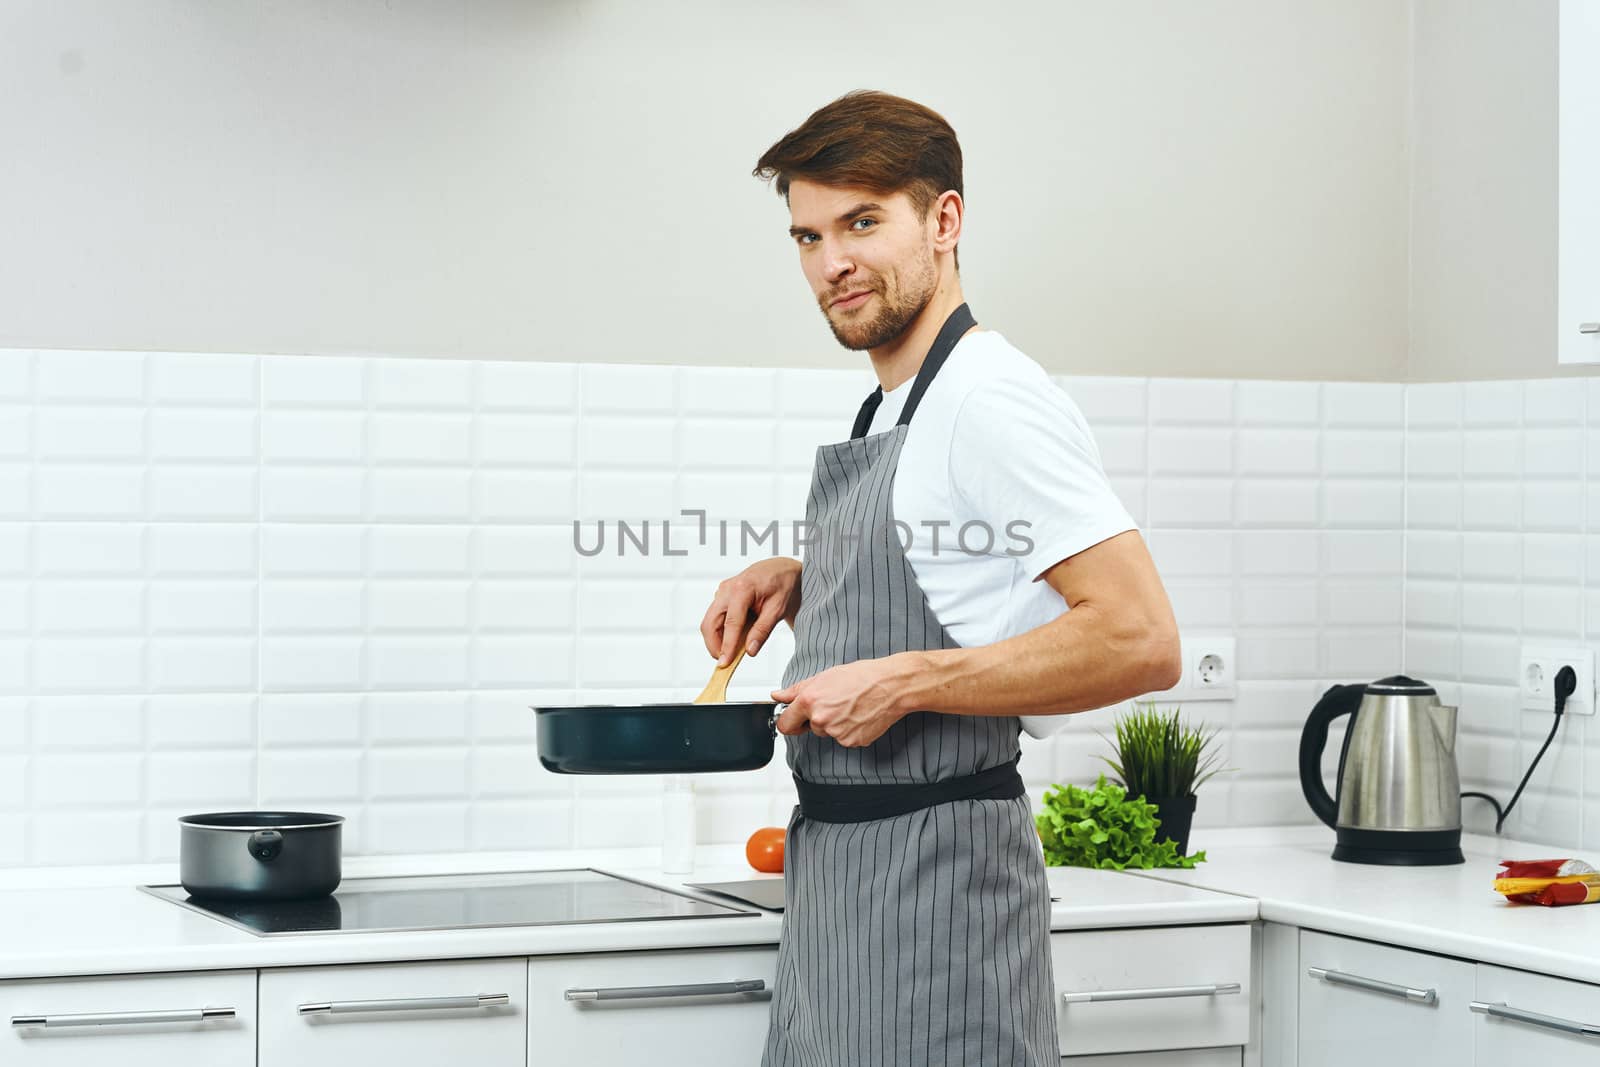 A male chef in gray aprons is holding a frying pan in his hands cooking food kitchen lifestyle